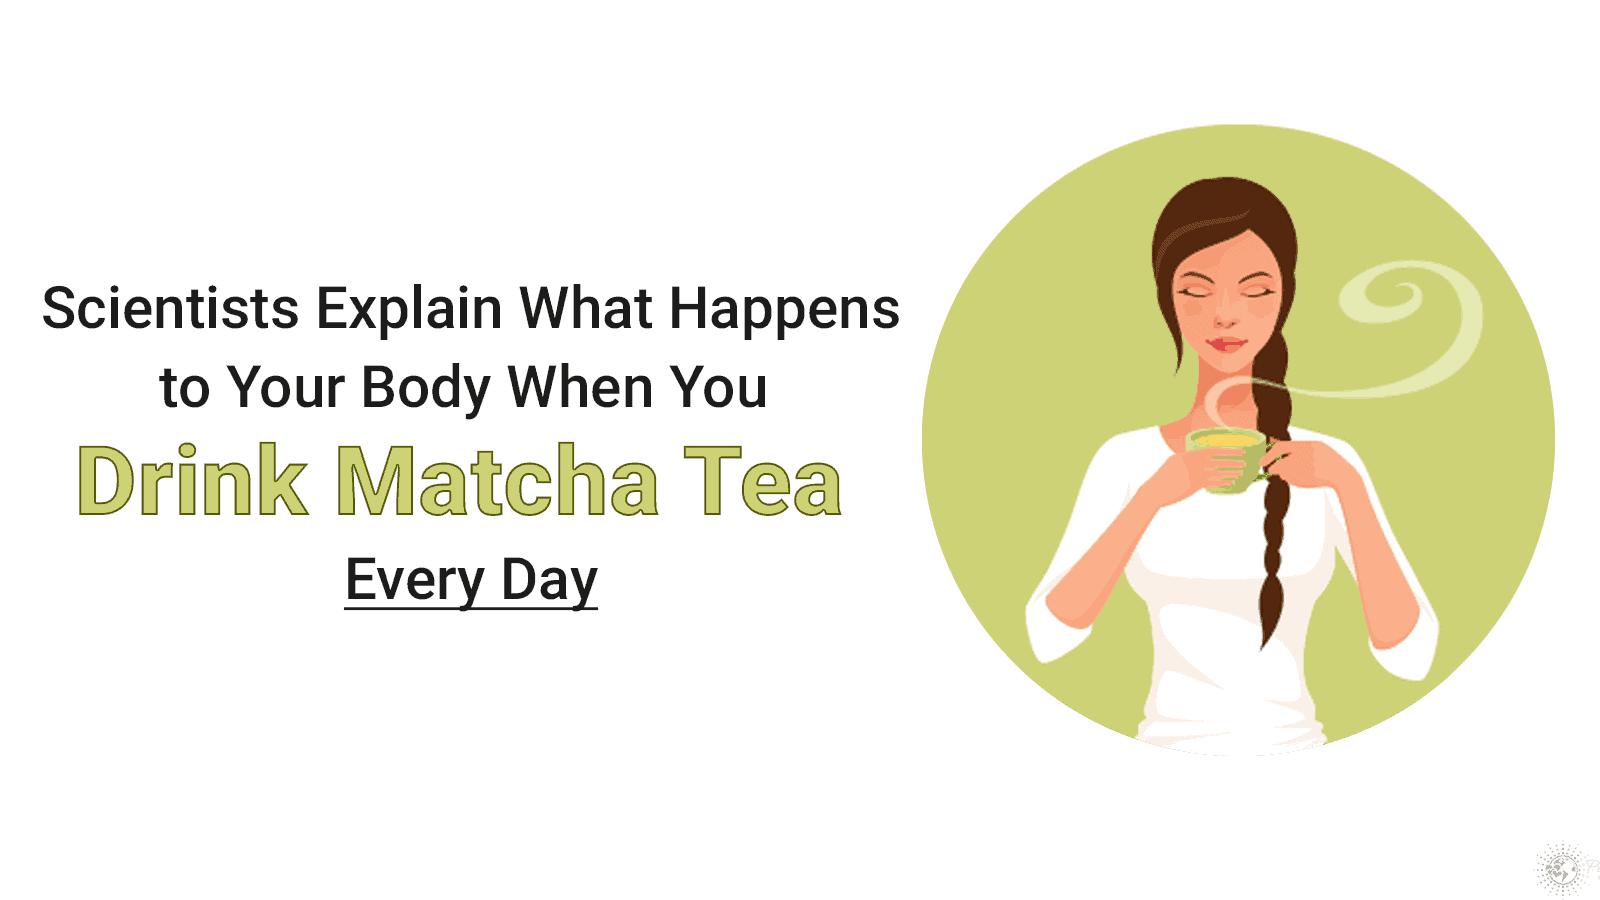 Scientists Explain What Happens to Your Body When You Drink Matcha Tea Every Day